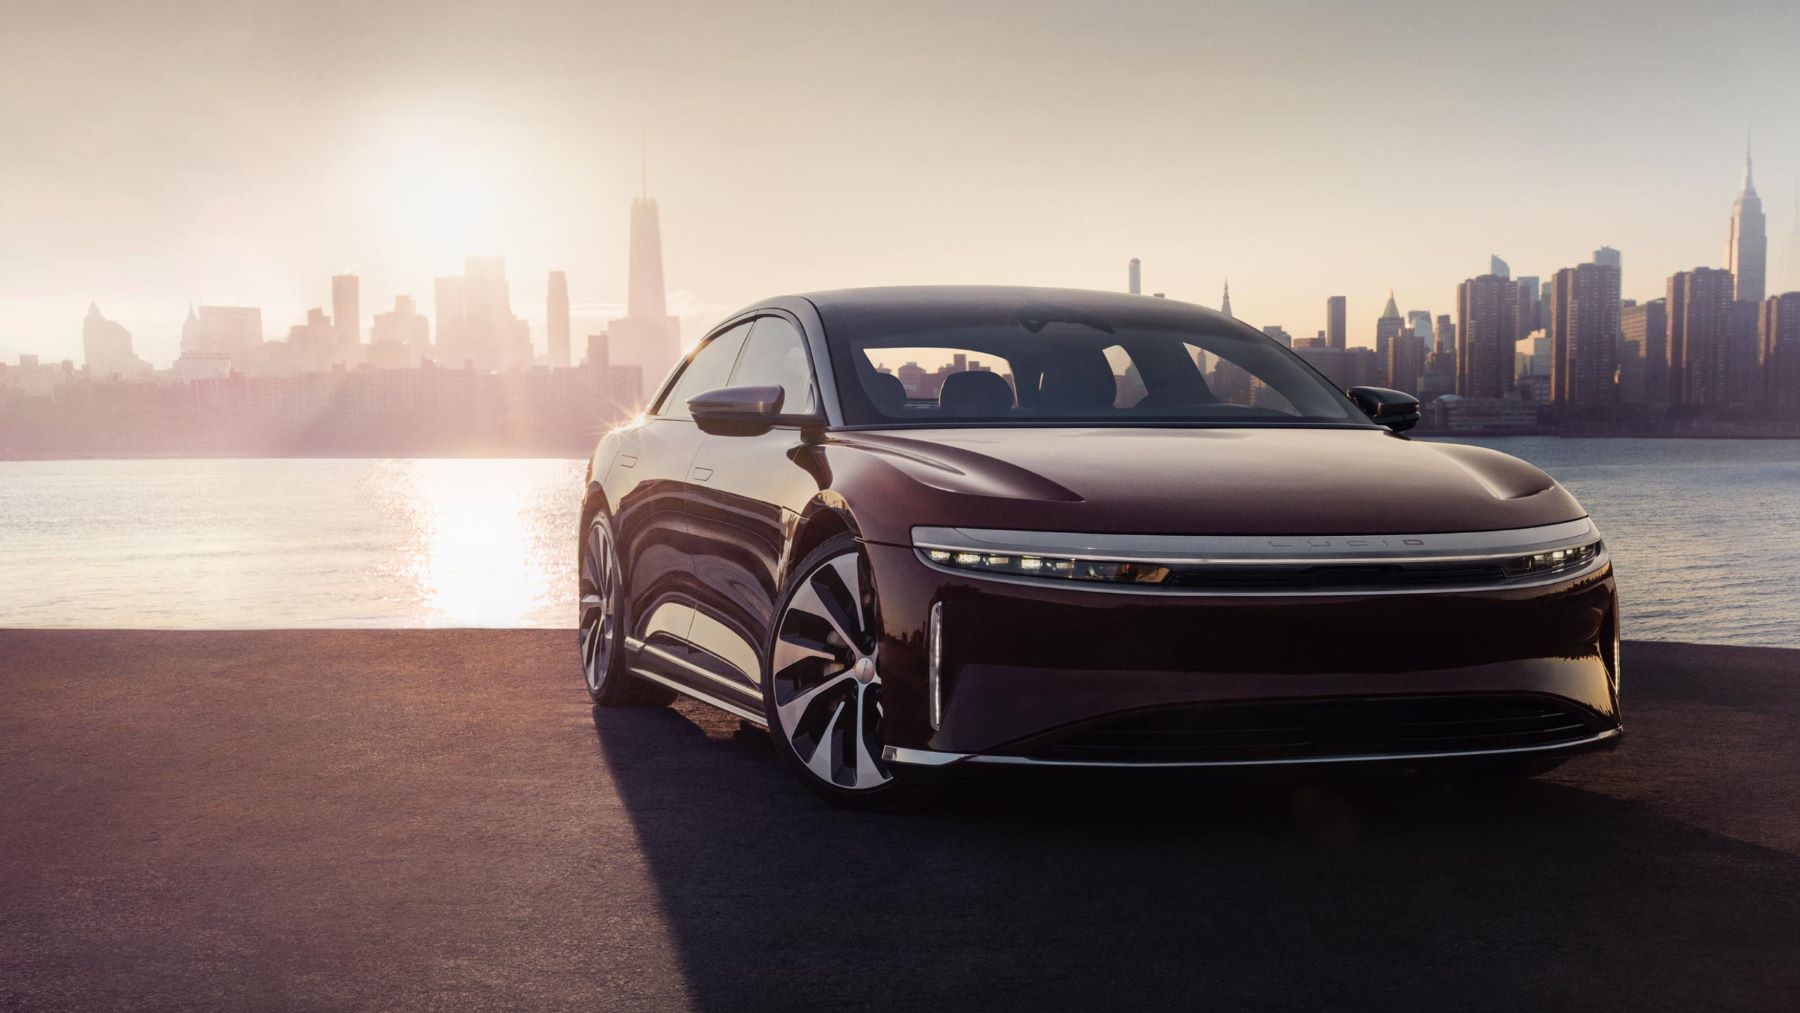 A 2022 Lucid Air luxury electric sedan model parked by the sea as the sun rises of a city skyline of skyscrapers